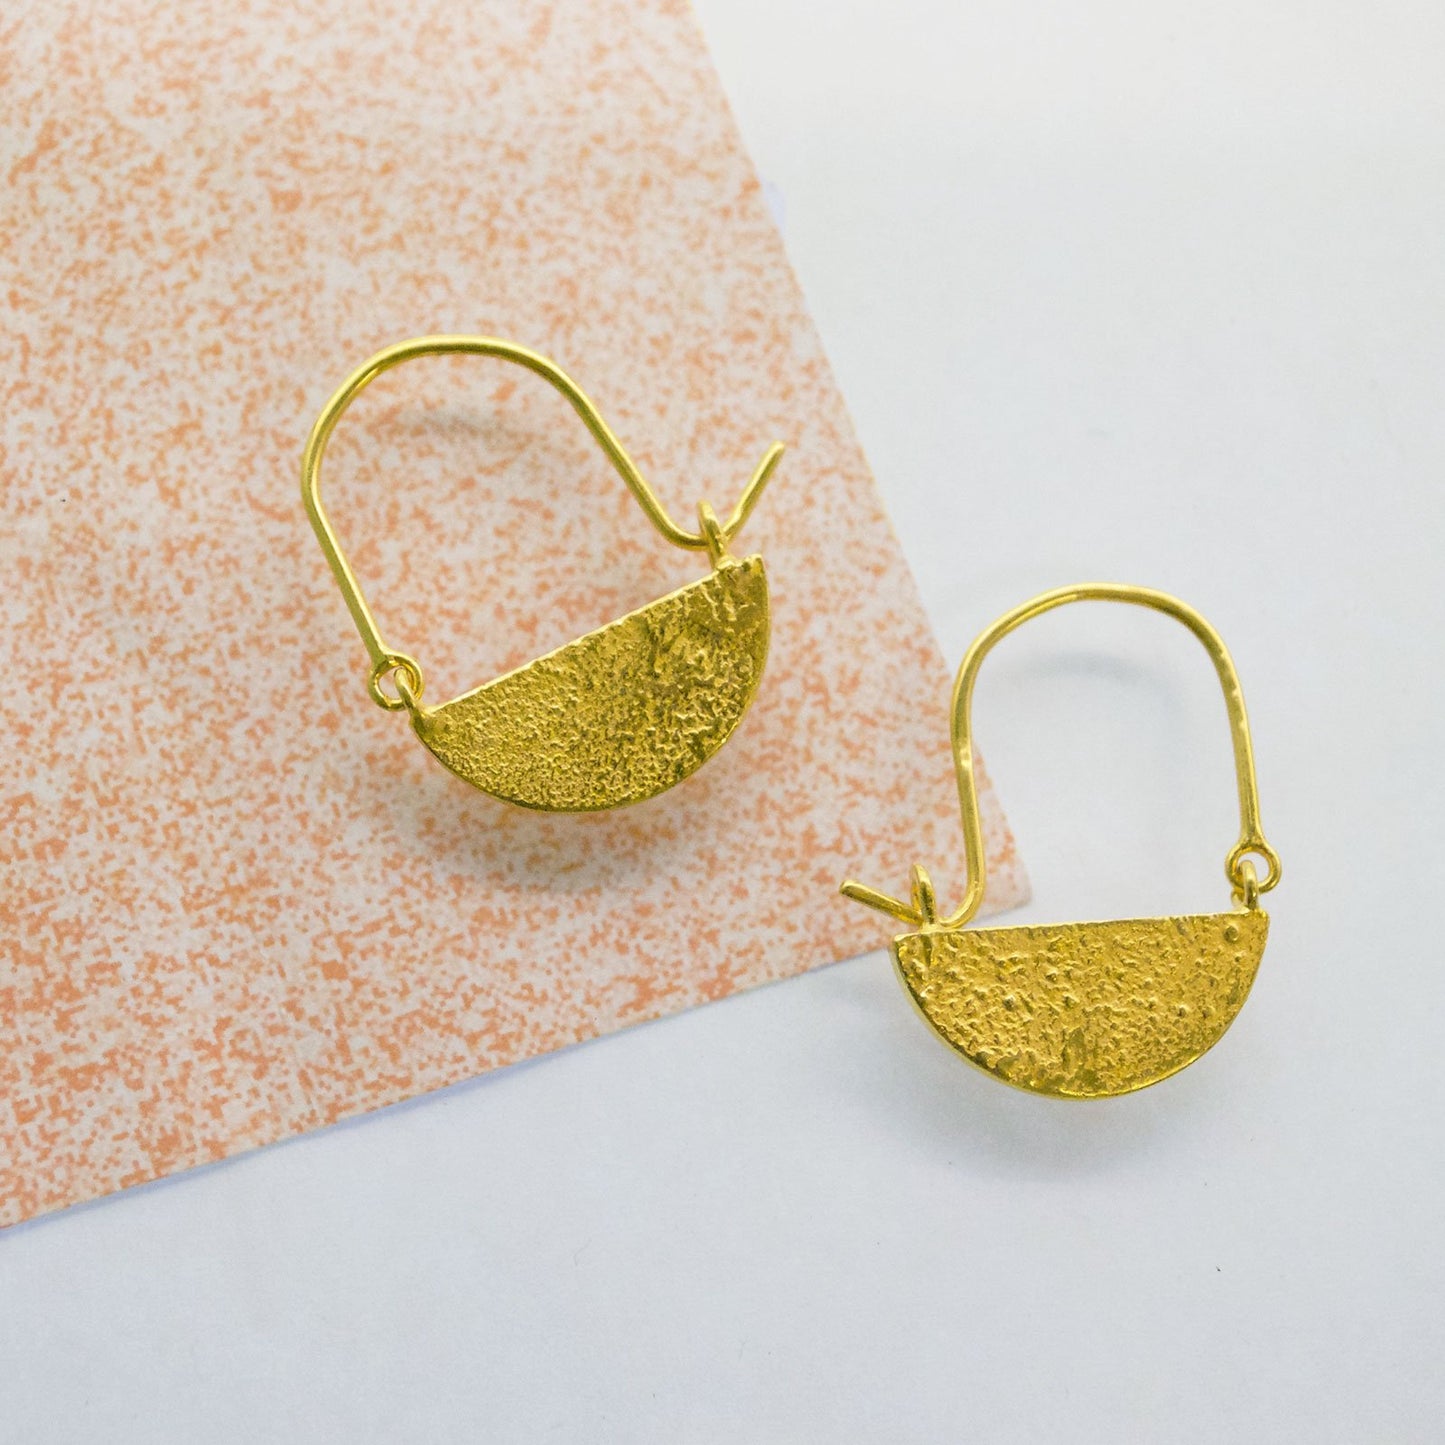 Half Moon Hoops - Gold Plated Ready to wear